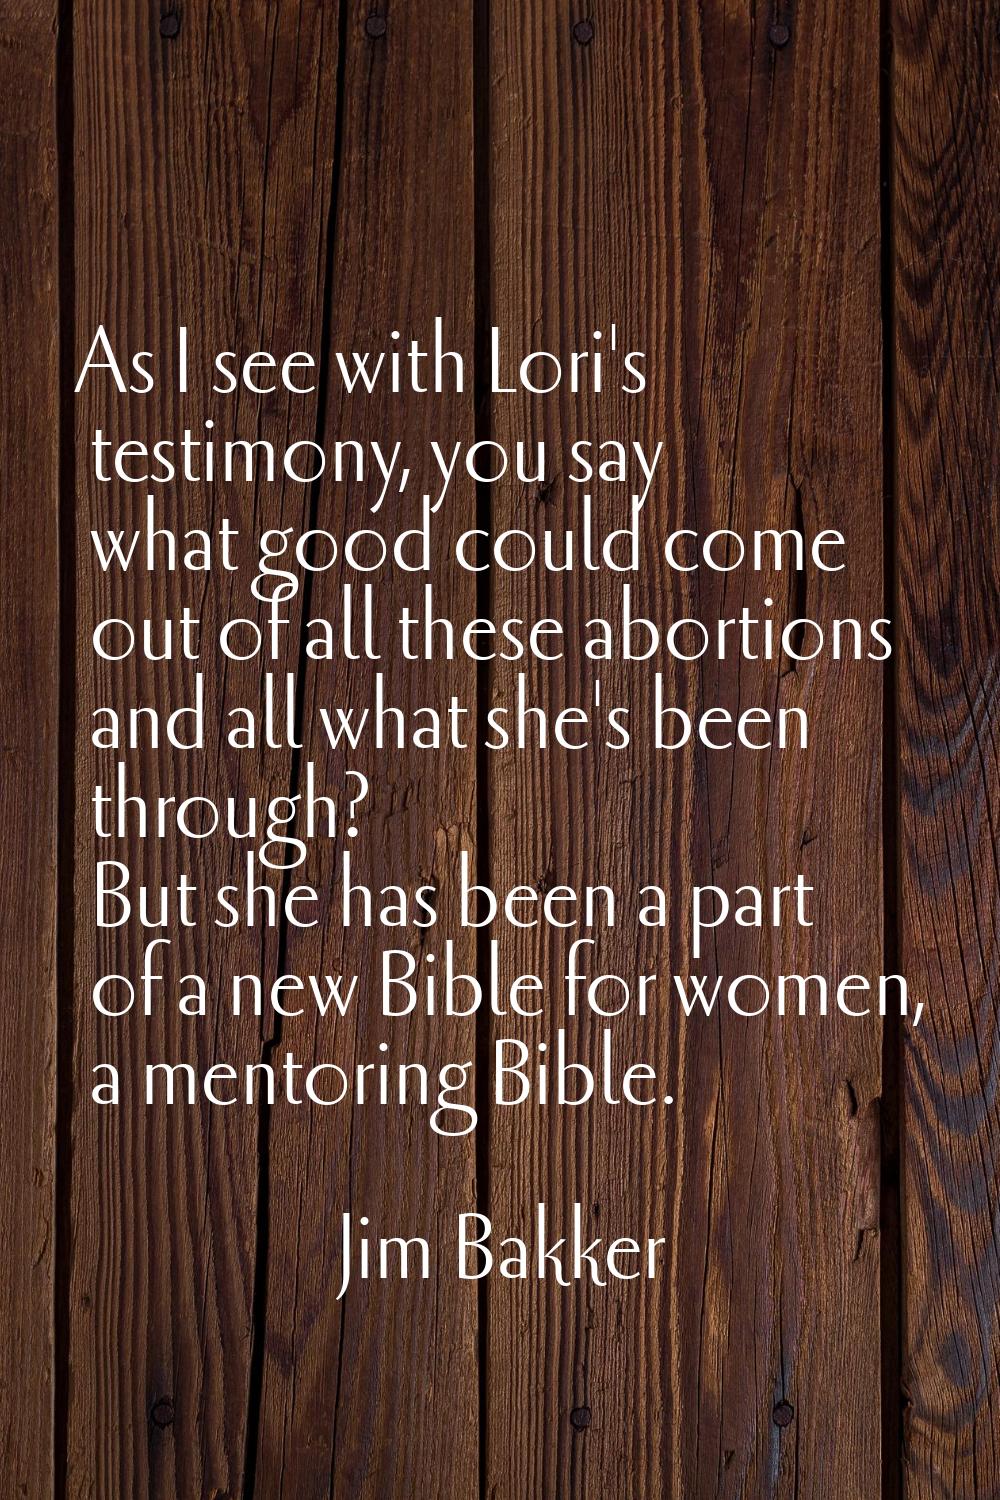 As I see with Lori's testimony, you say what good could come out of all these abortions and all wha